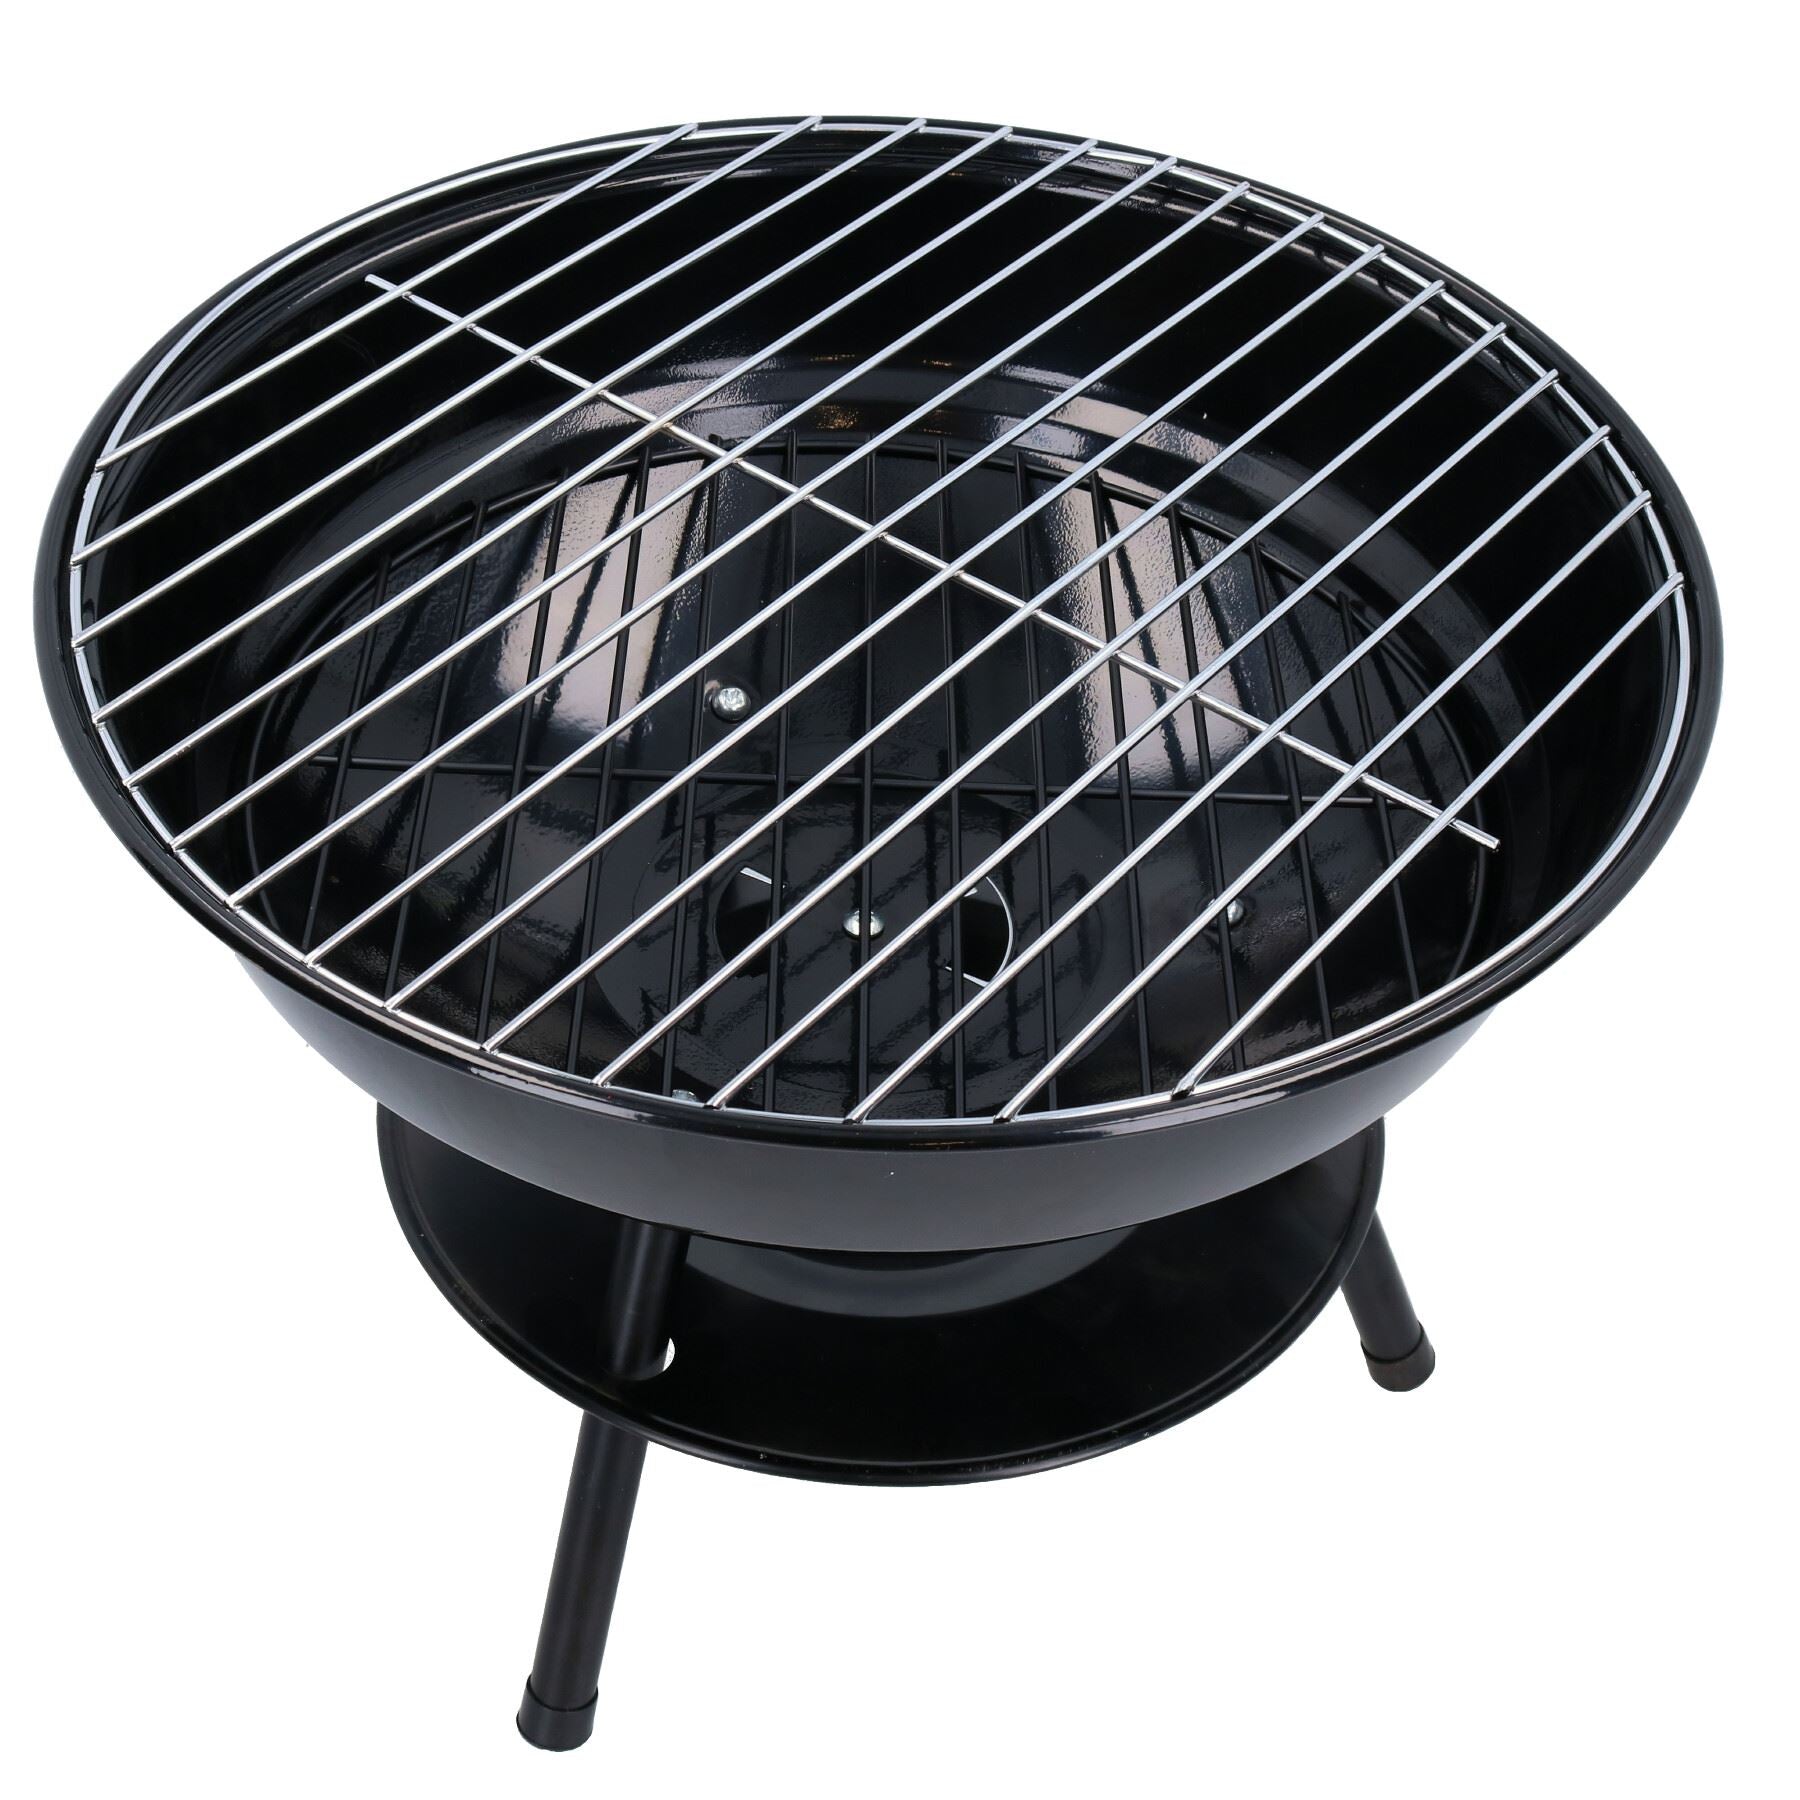 14” Round Portable Barbecue BBQ Grill Charcoal Cooking Outside Garden Camping